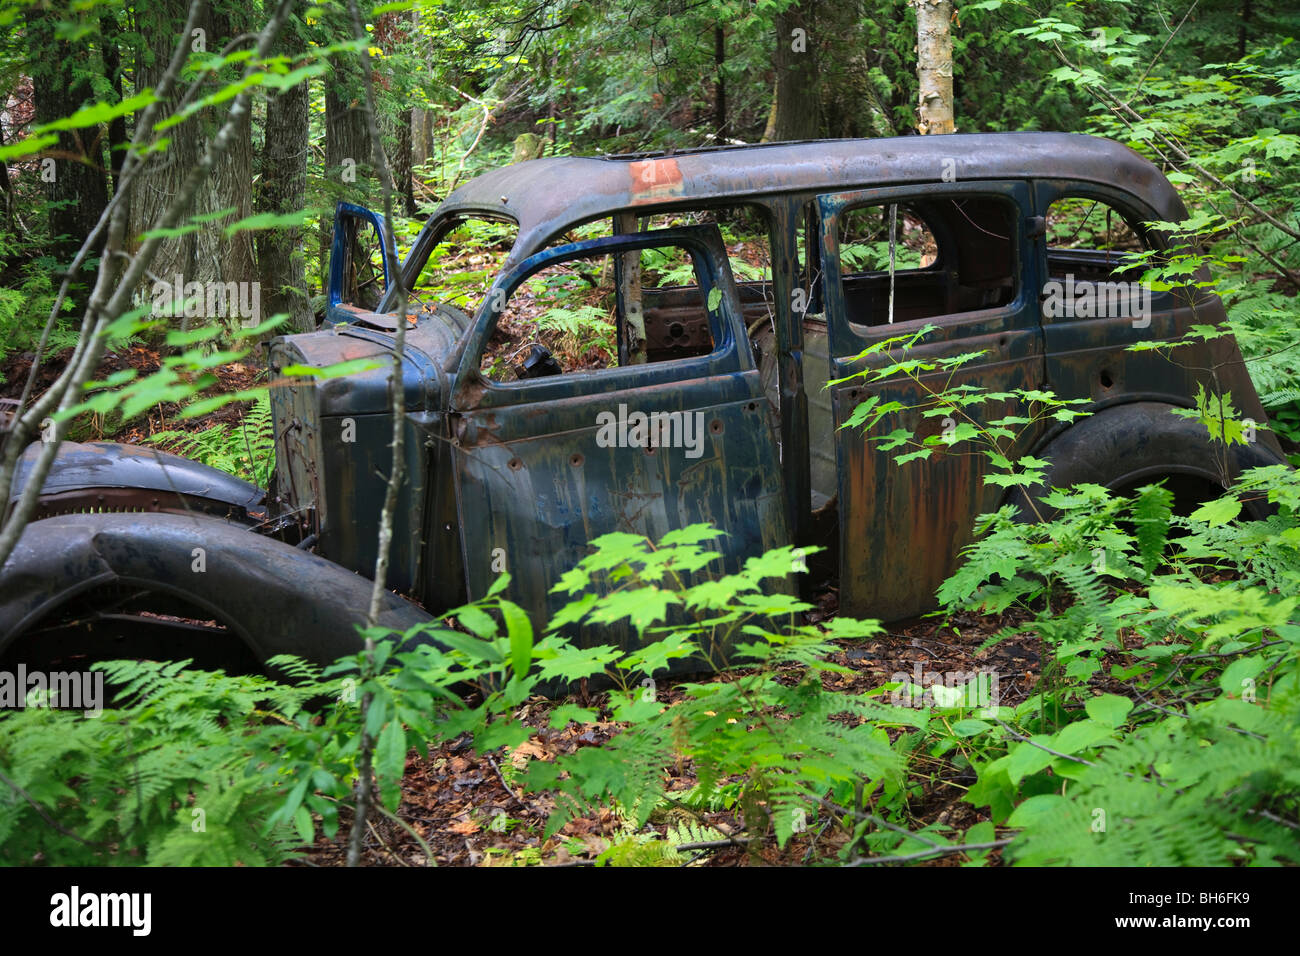 Abandoned wreck of a bullet riddled old car in forest near Copper Harbor, Michigan, USA Stock Photo